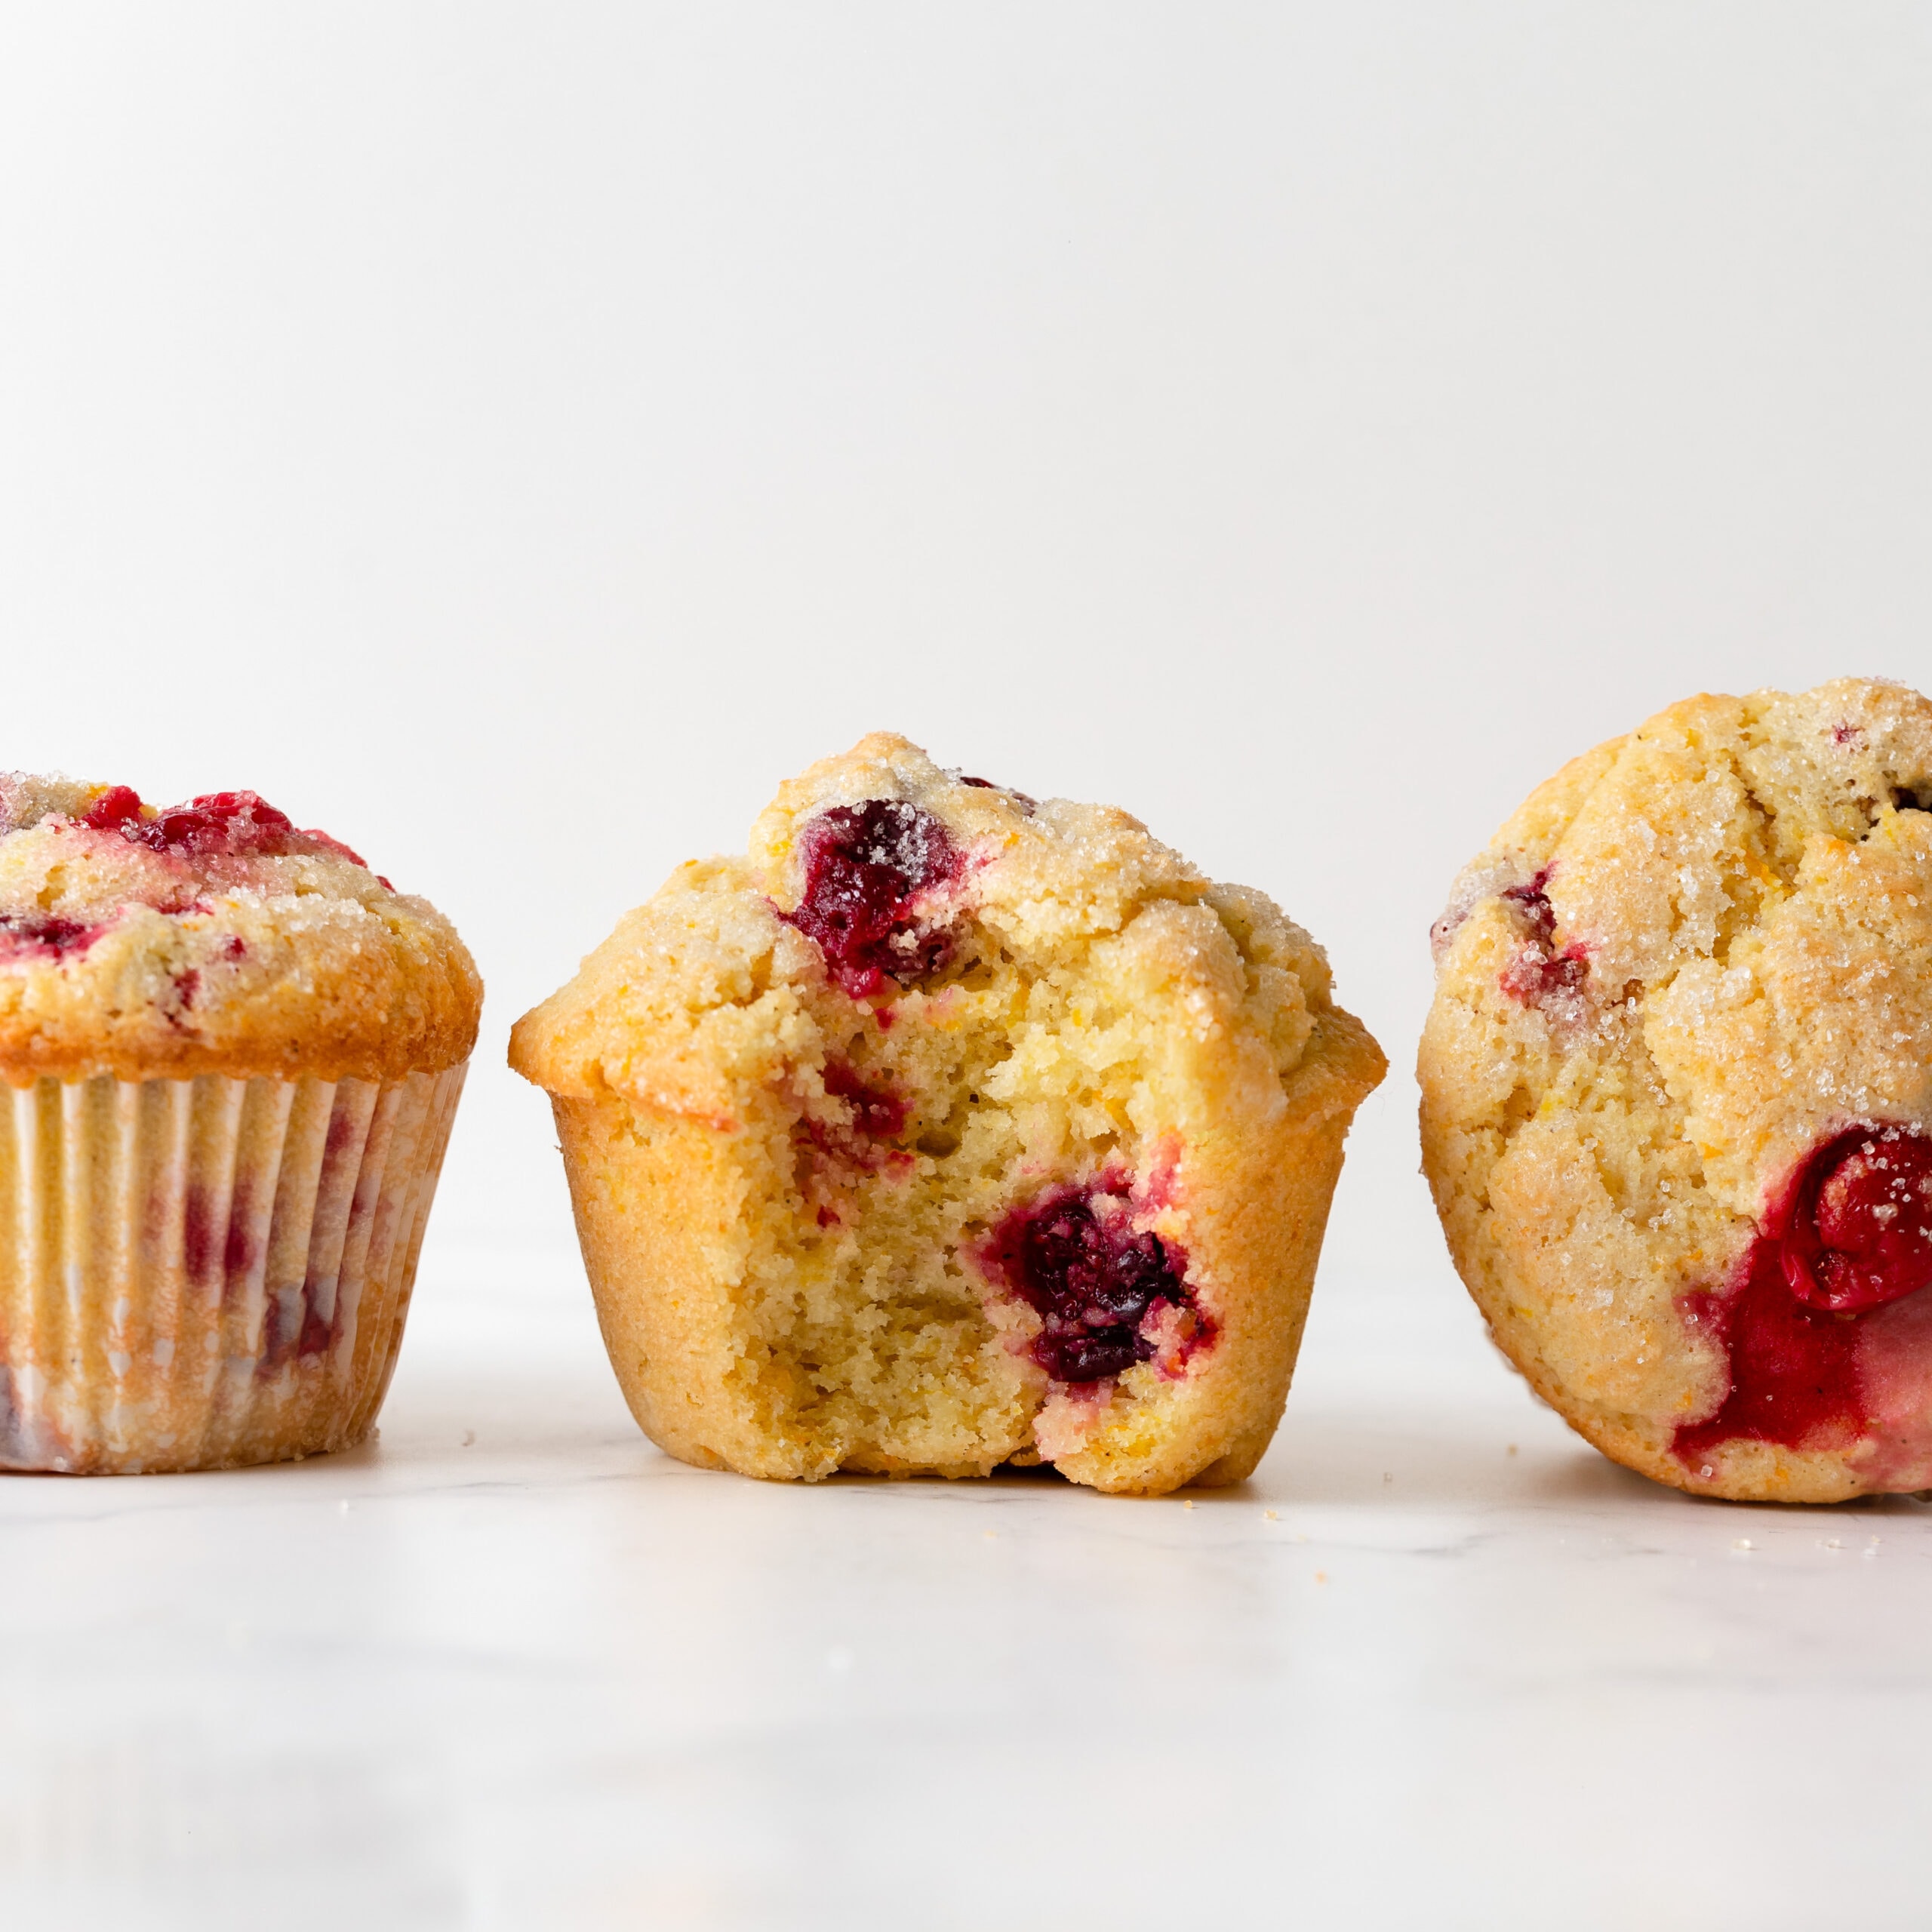 Three cranberry orange muffins, one with a bite take out of the middle showing the crumb and cranberries.